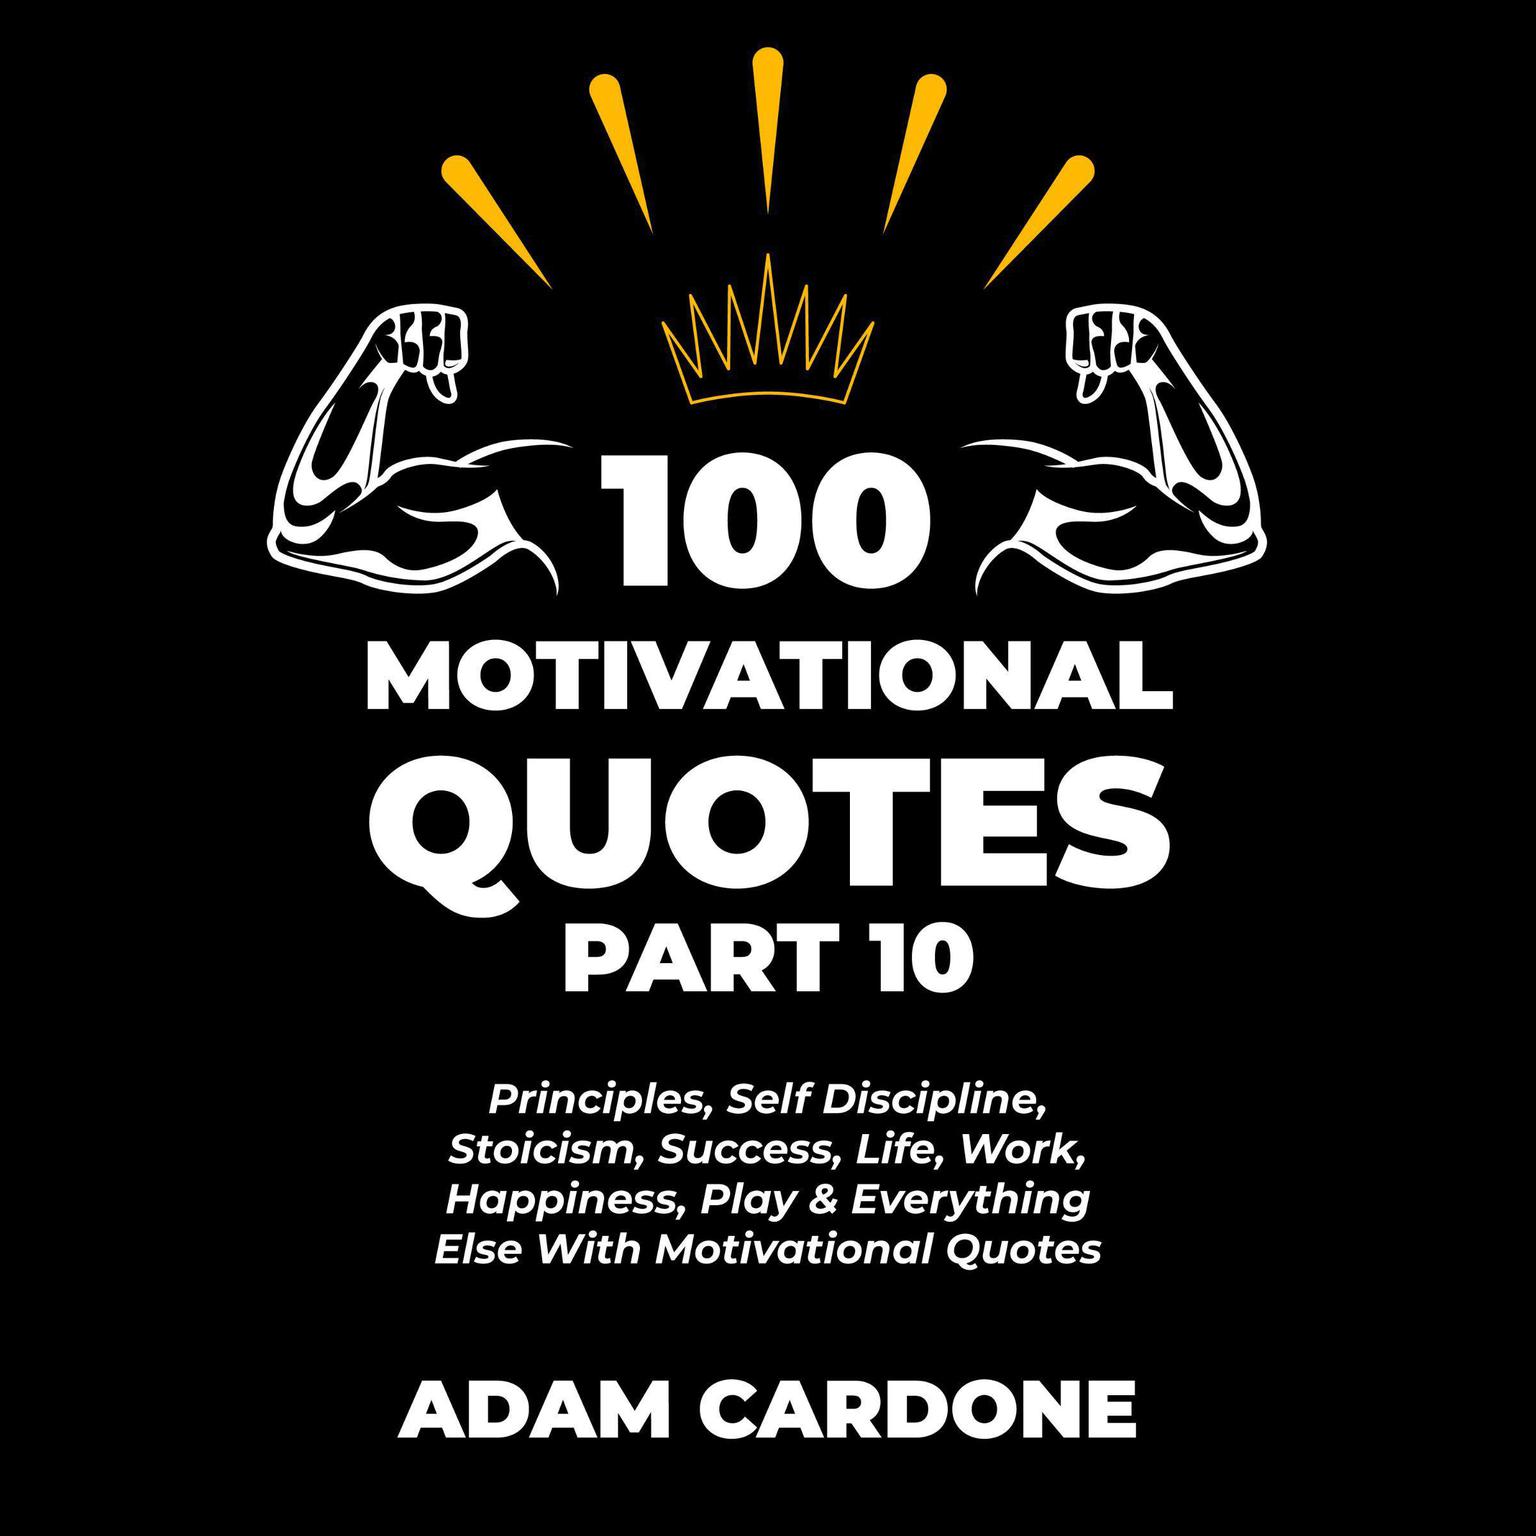 100 Motivational Quotes Part 10: Principles, Self Discipline, Stoicism, Success, Life, Work, Happiness, Play & Everything Else With Motivational Quotes Audiobook, by Adam Cardone